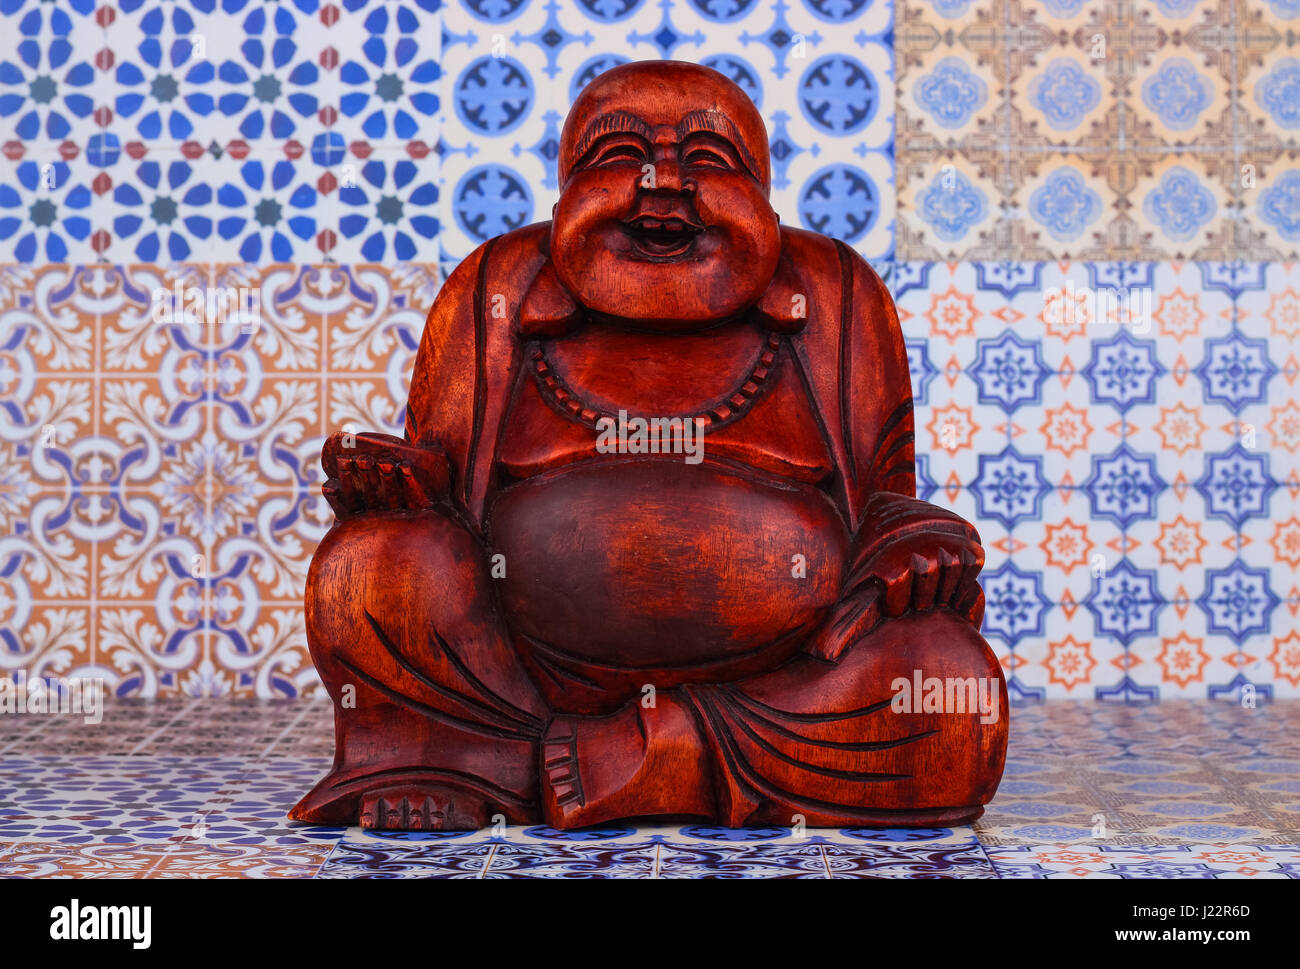 Buddha statue on a colorful background / featuring a wooden statue of  cheerful wise Buddha on colorful Oriental artistic pattern background Stock Photo